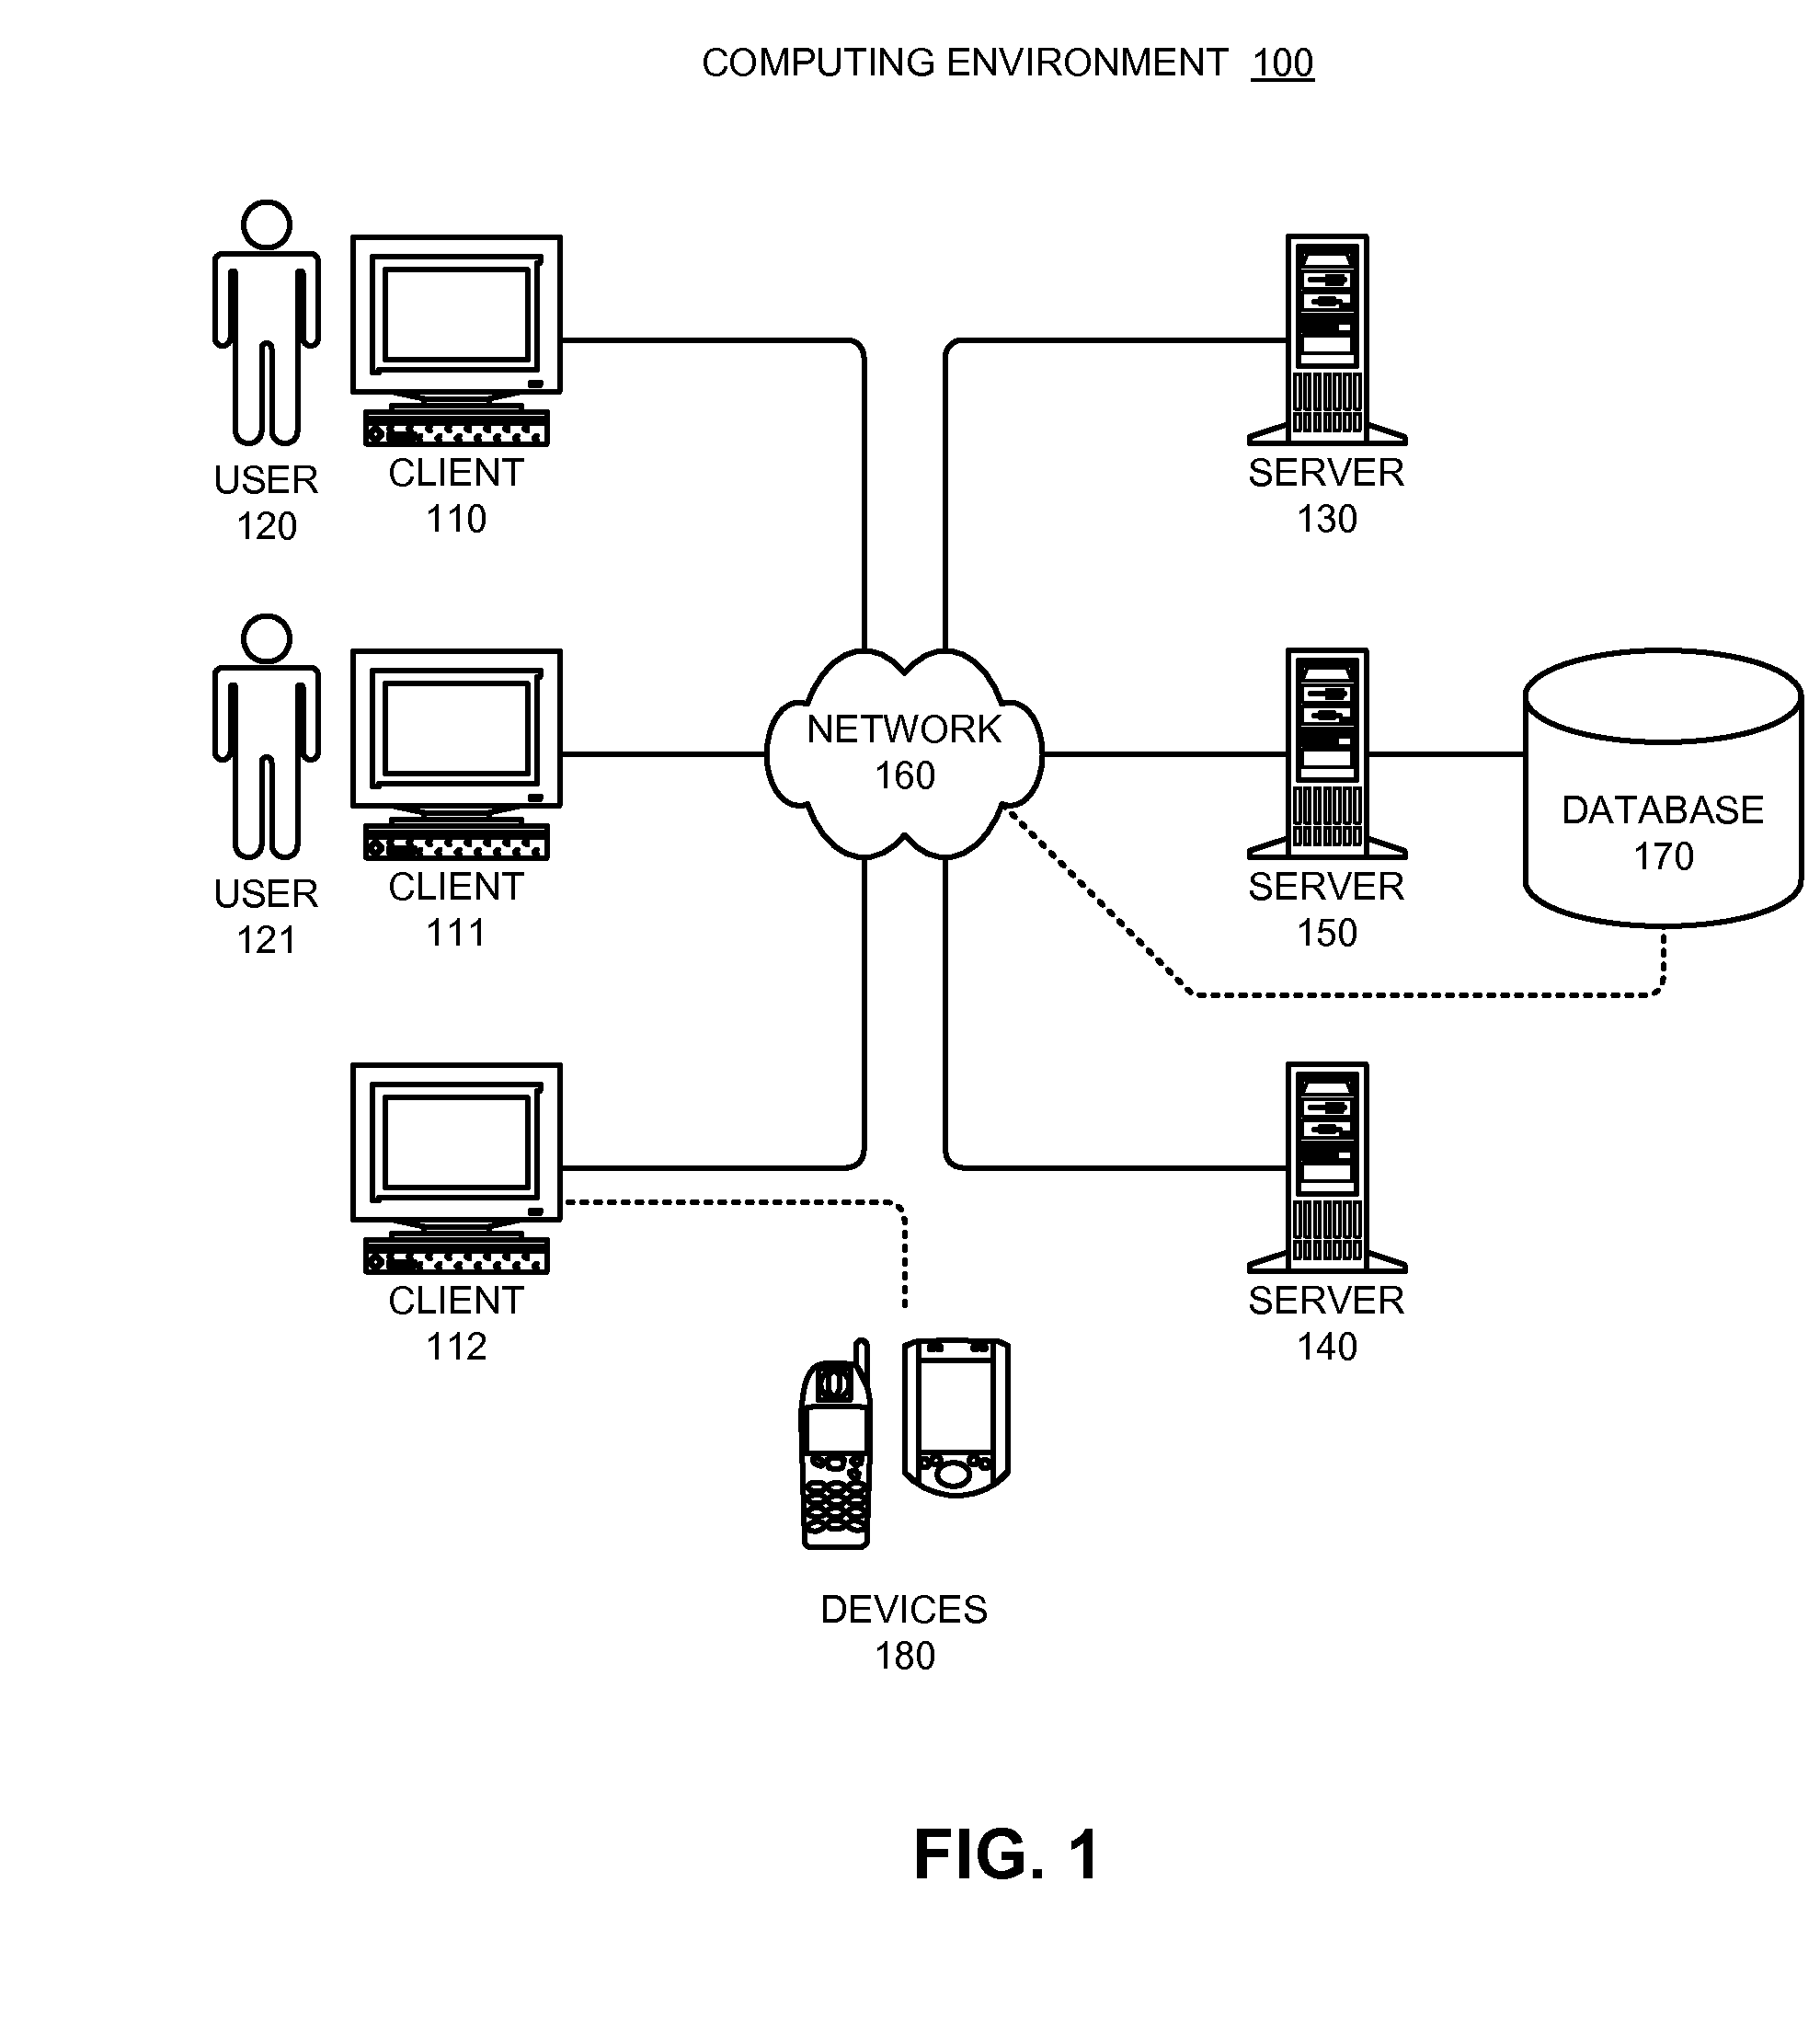 Method and apparatus for performing multi-stage table updates